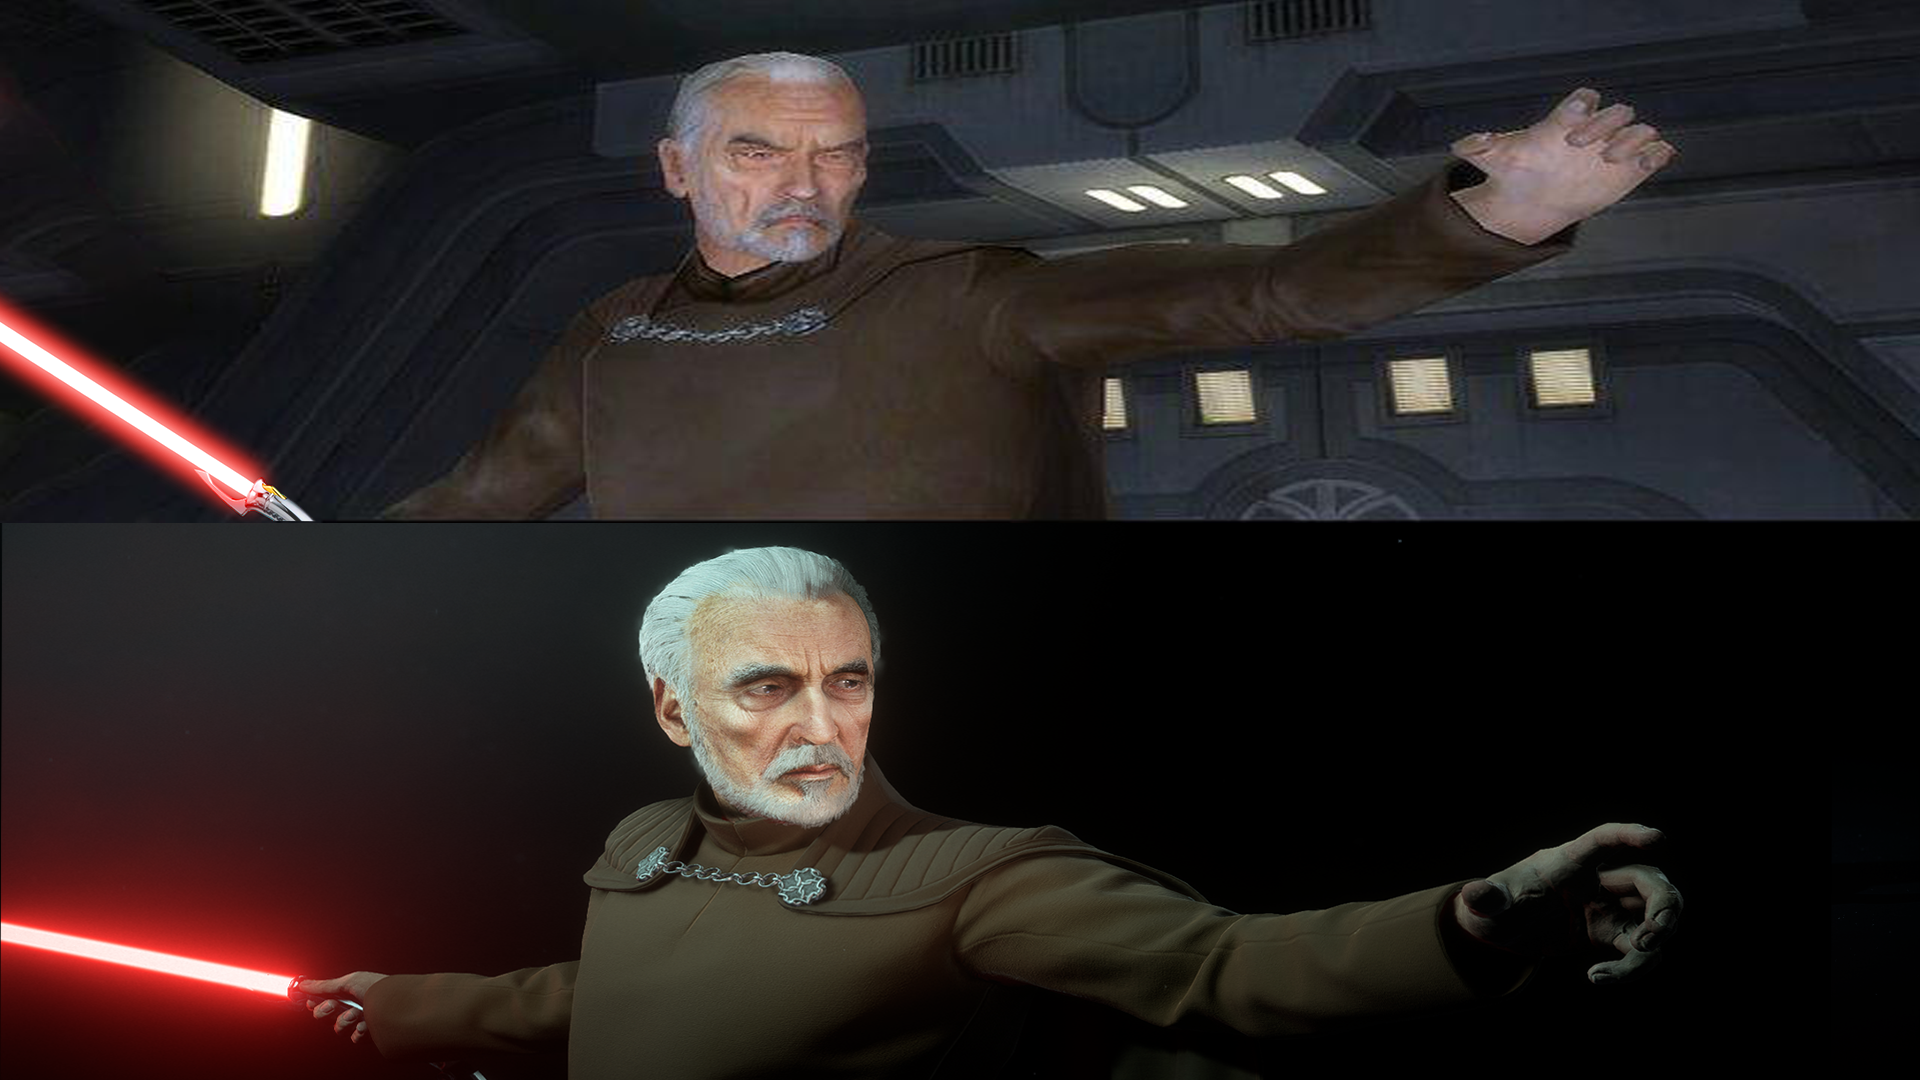 Count Dooku PS2 Game at Star Wars: Battlefront II (2017) Nexus and community